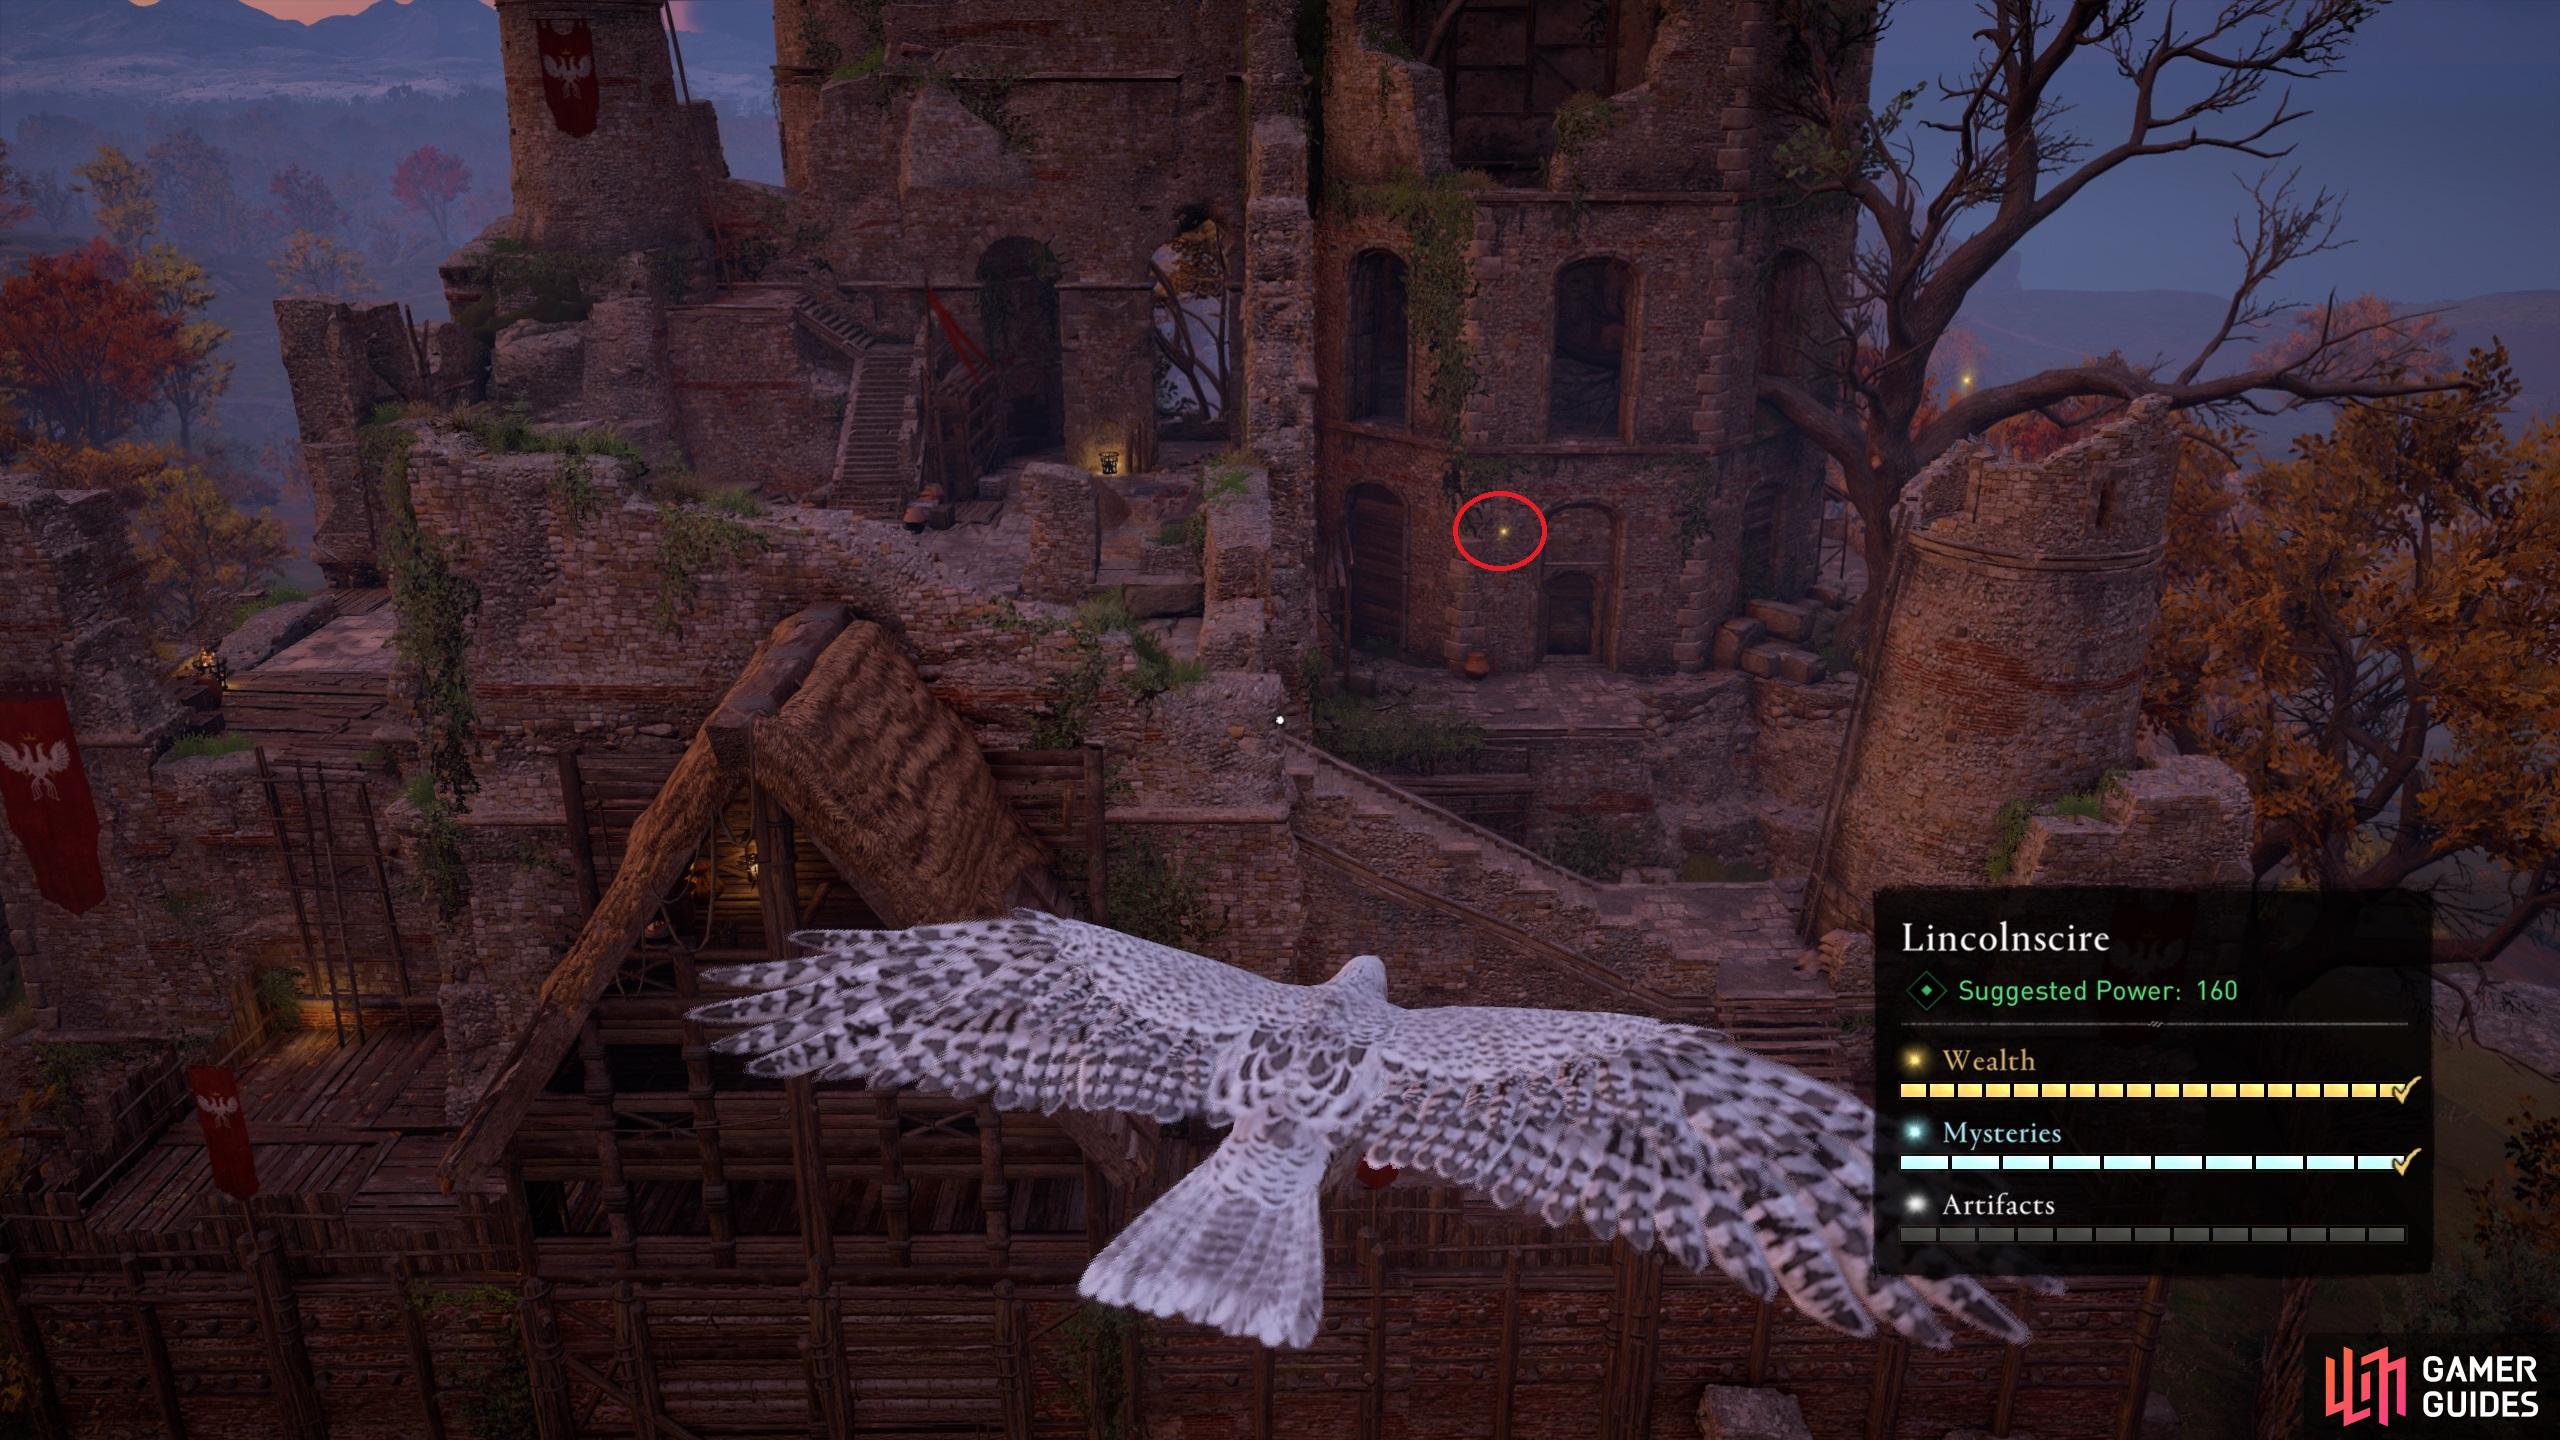 Use Odin's Sight and your bird to identify the location of the Gedriht in the castle.